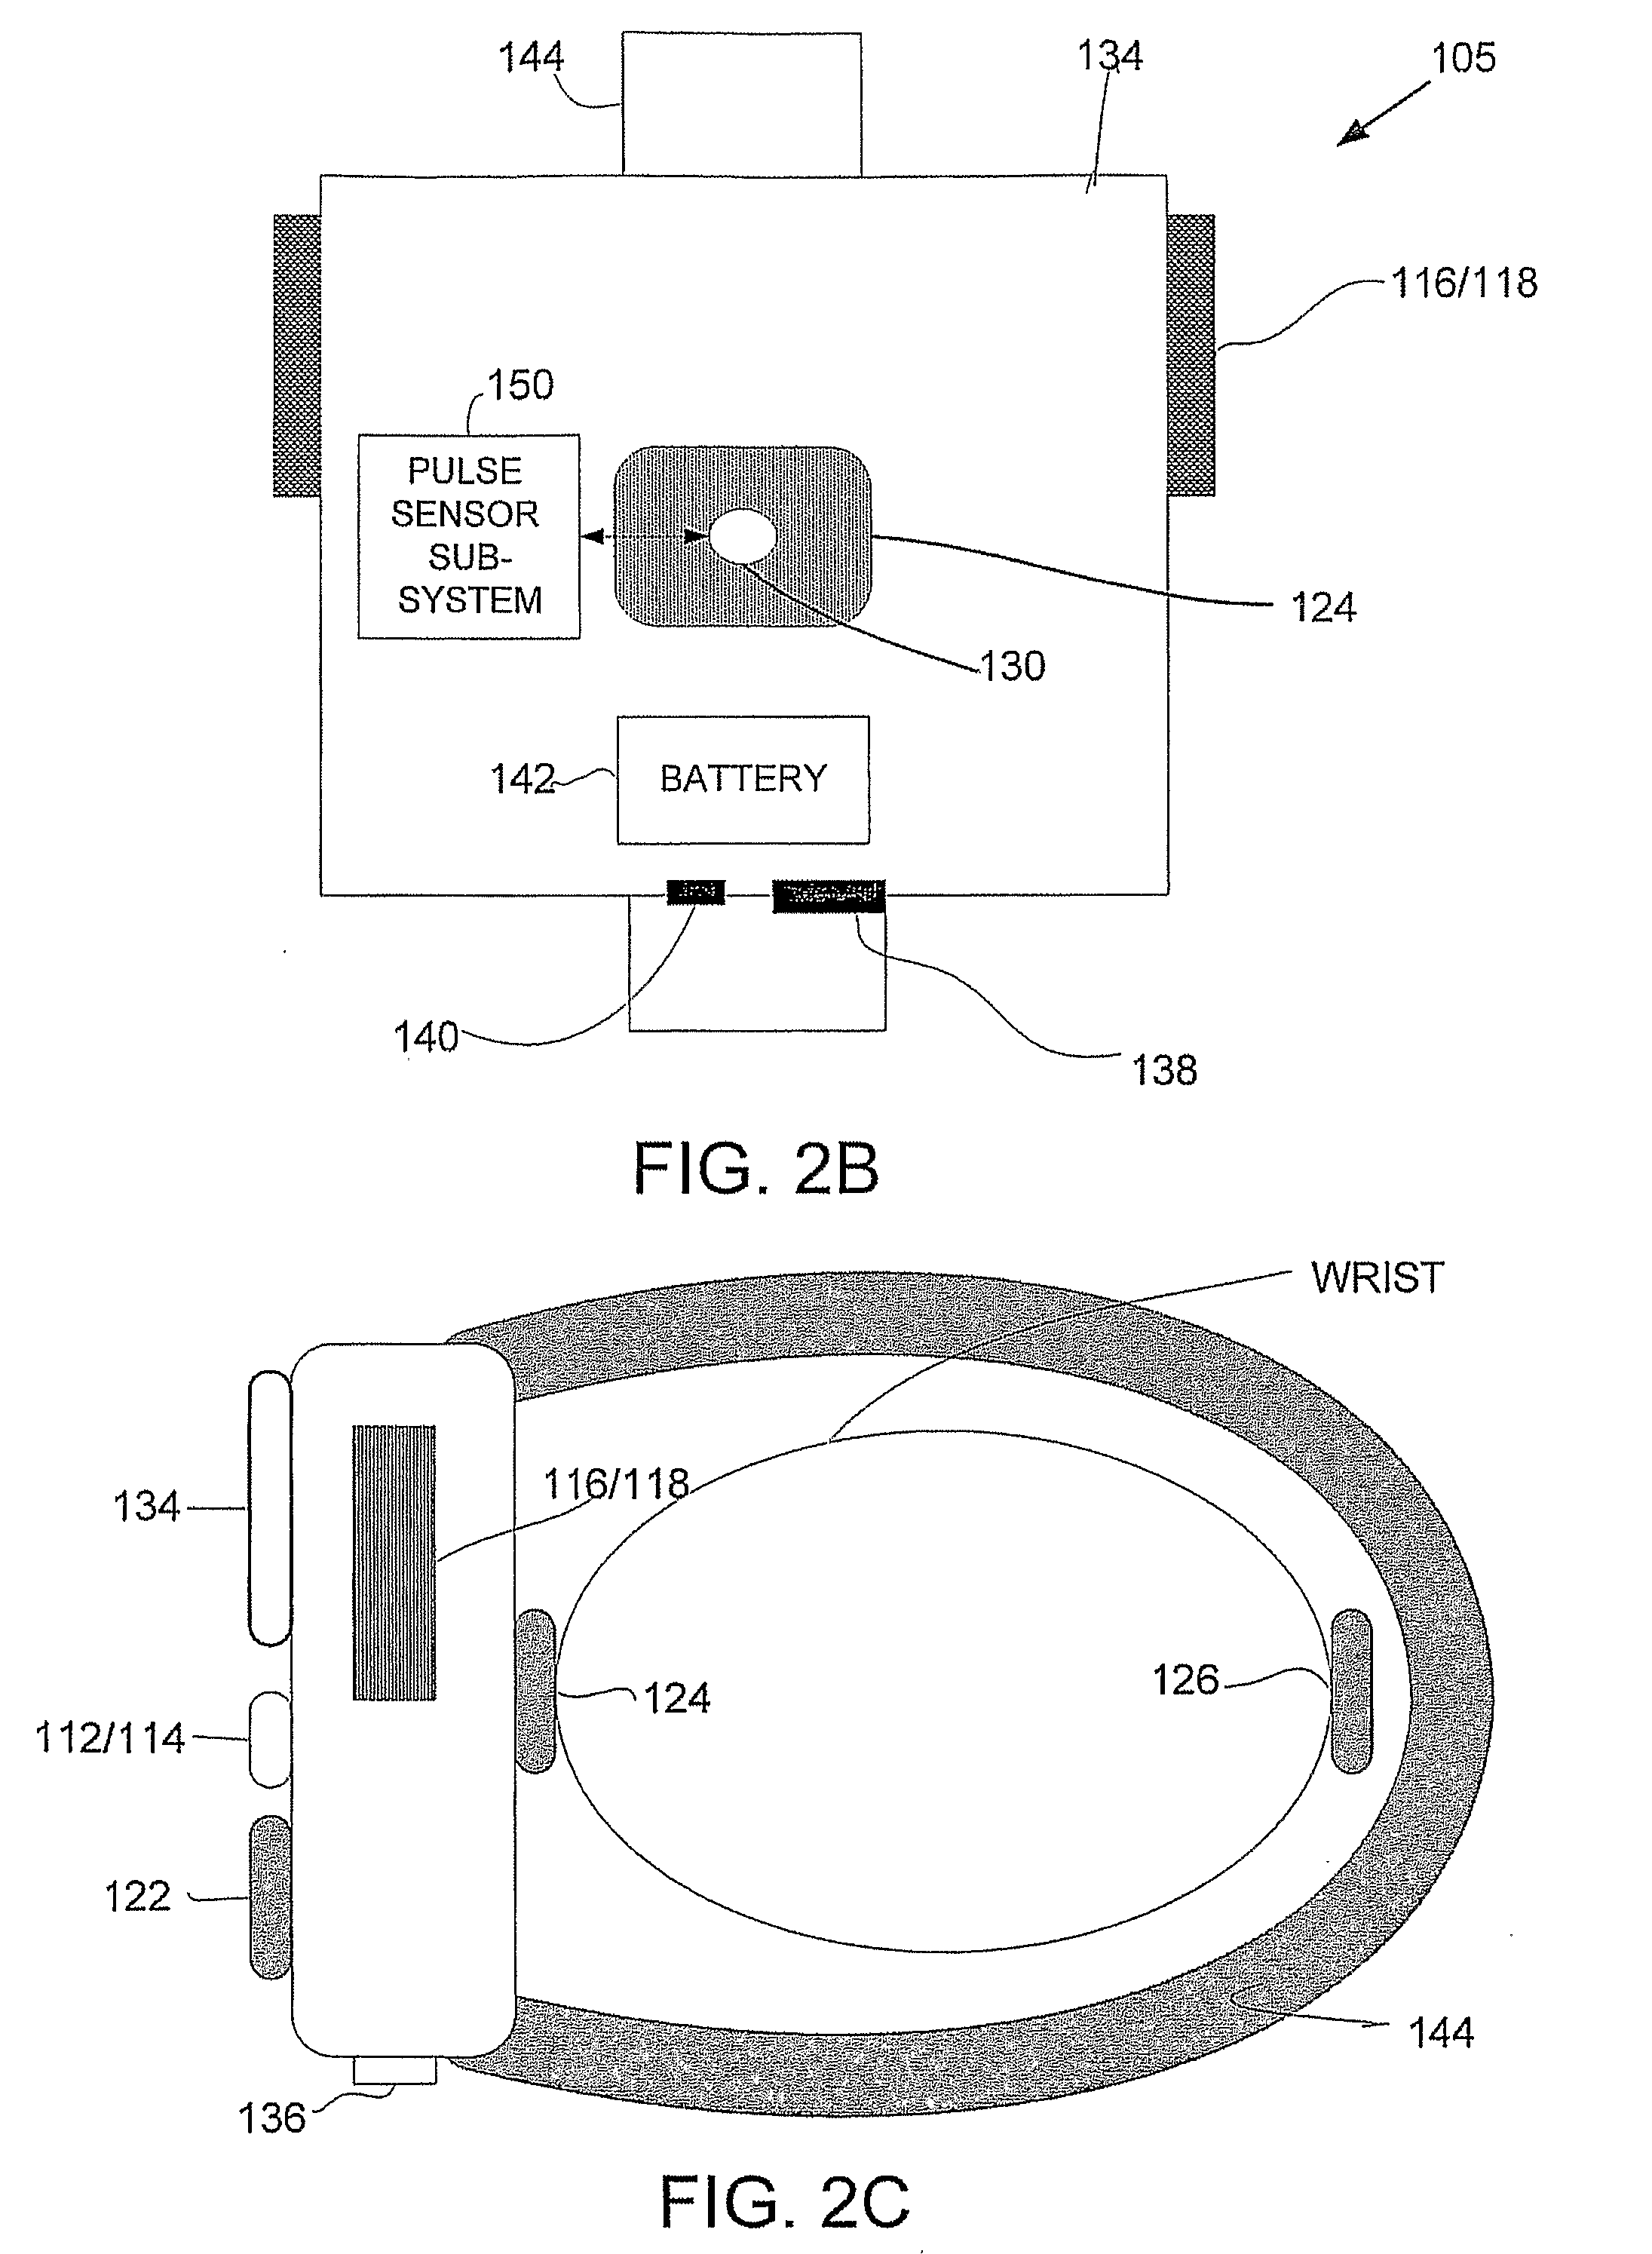 Wearable Device, System and Method for Measuring a Pulse While a User is in Motion